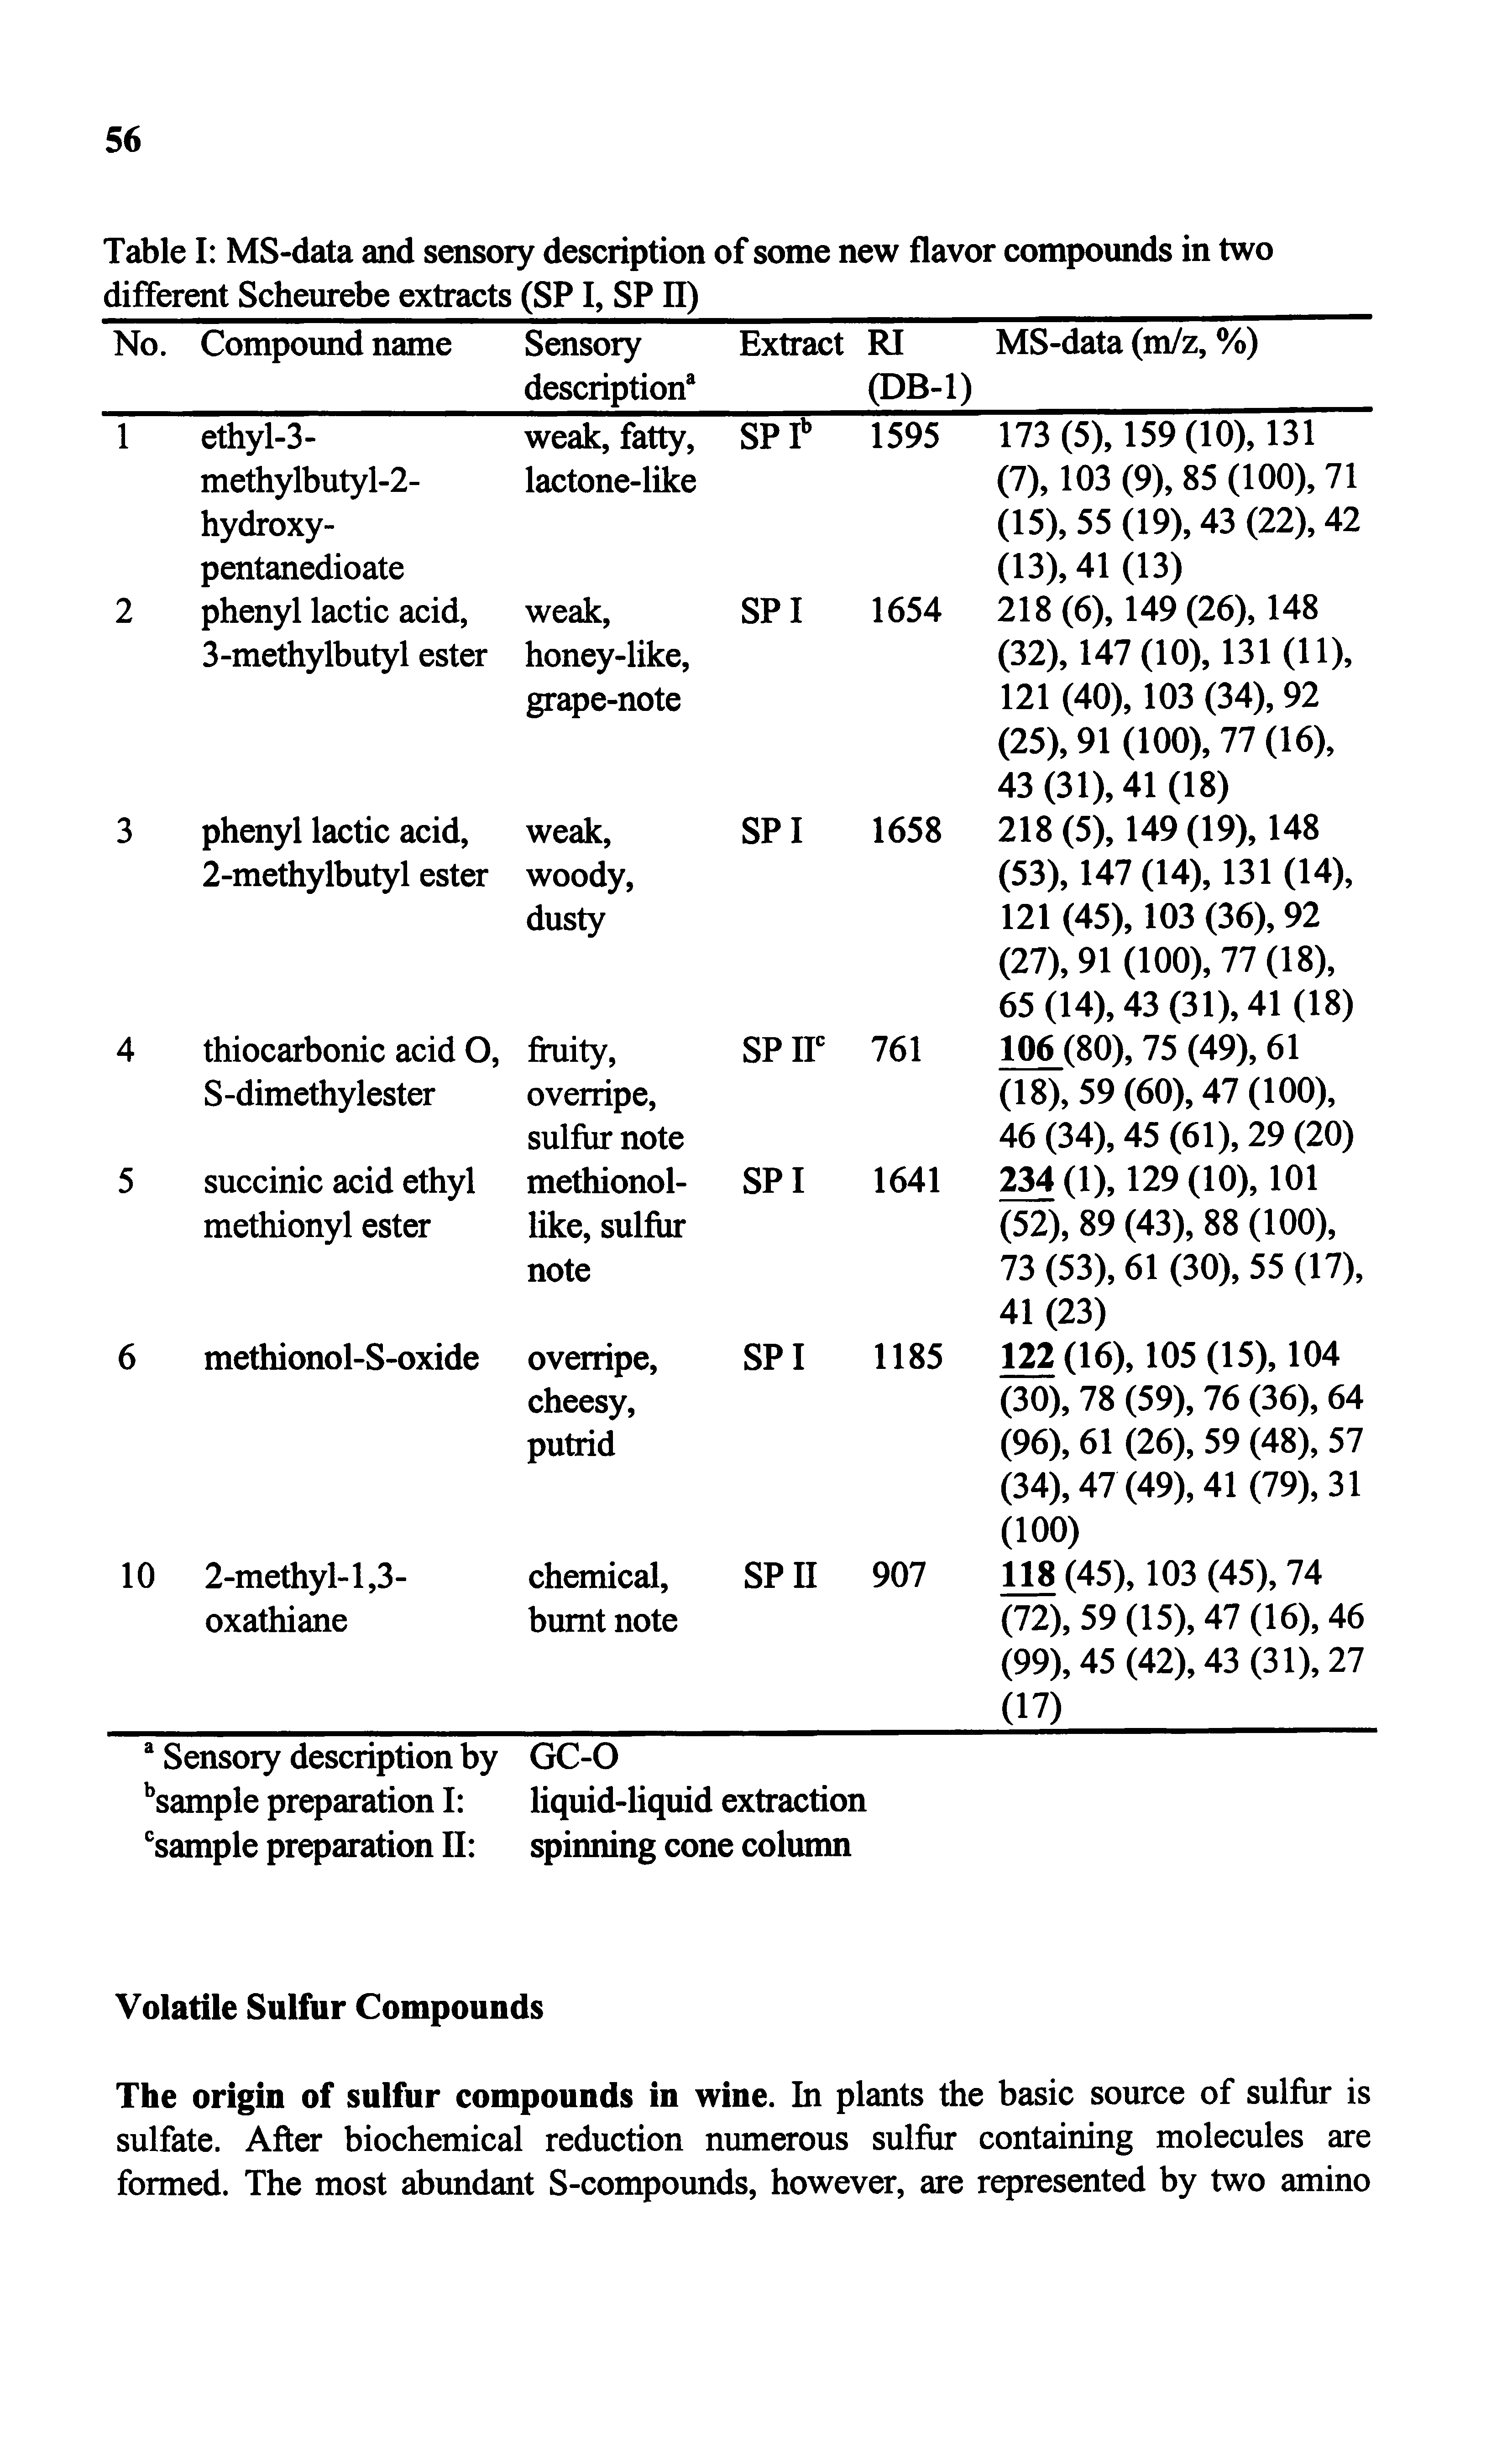 Table I MS-data and sensory description of some new flavor compounds in two different Scheurebe extracts (SP I, SPII)...